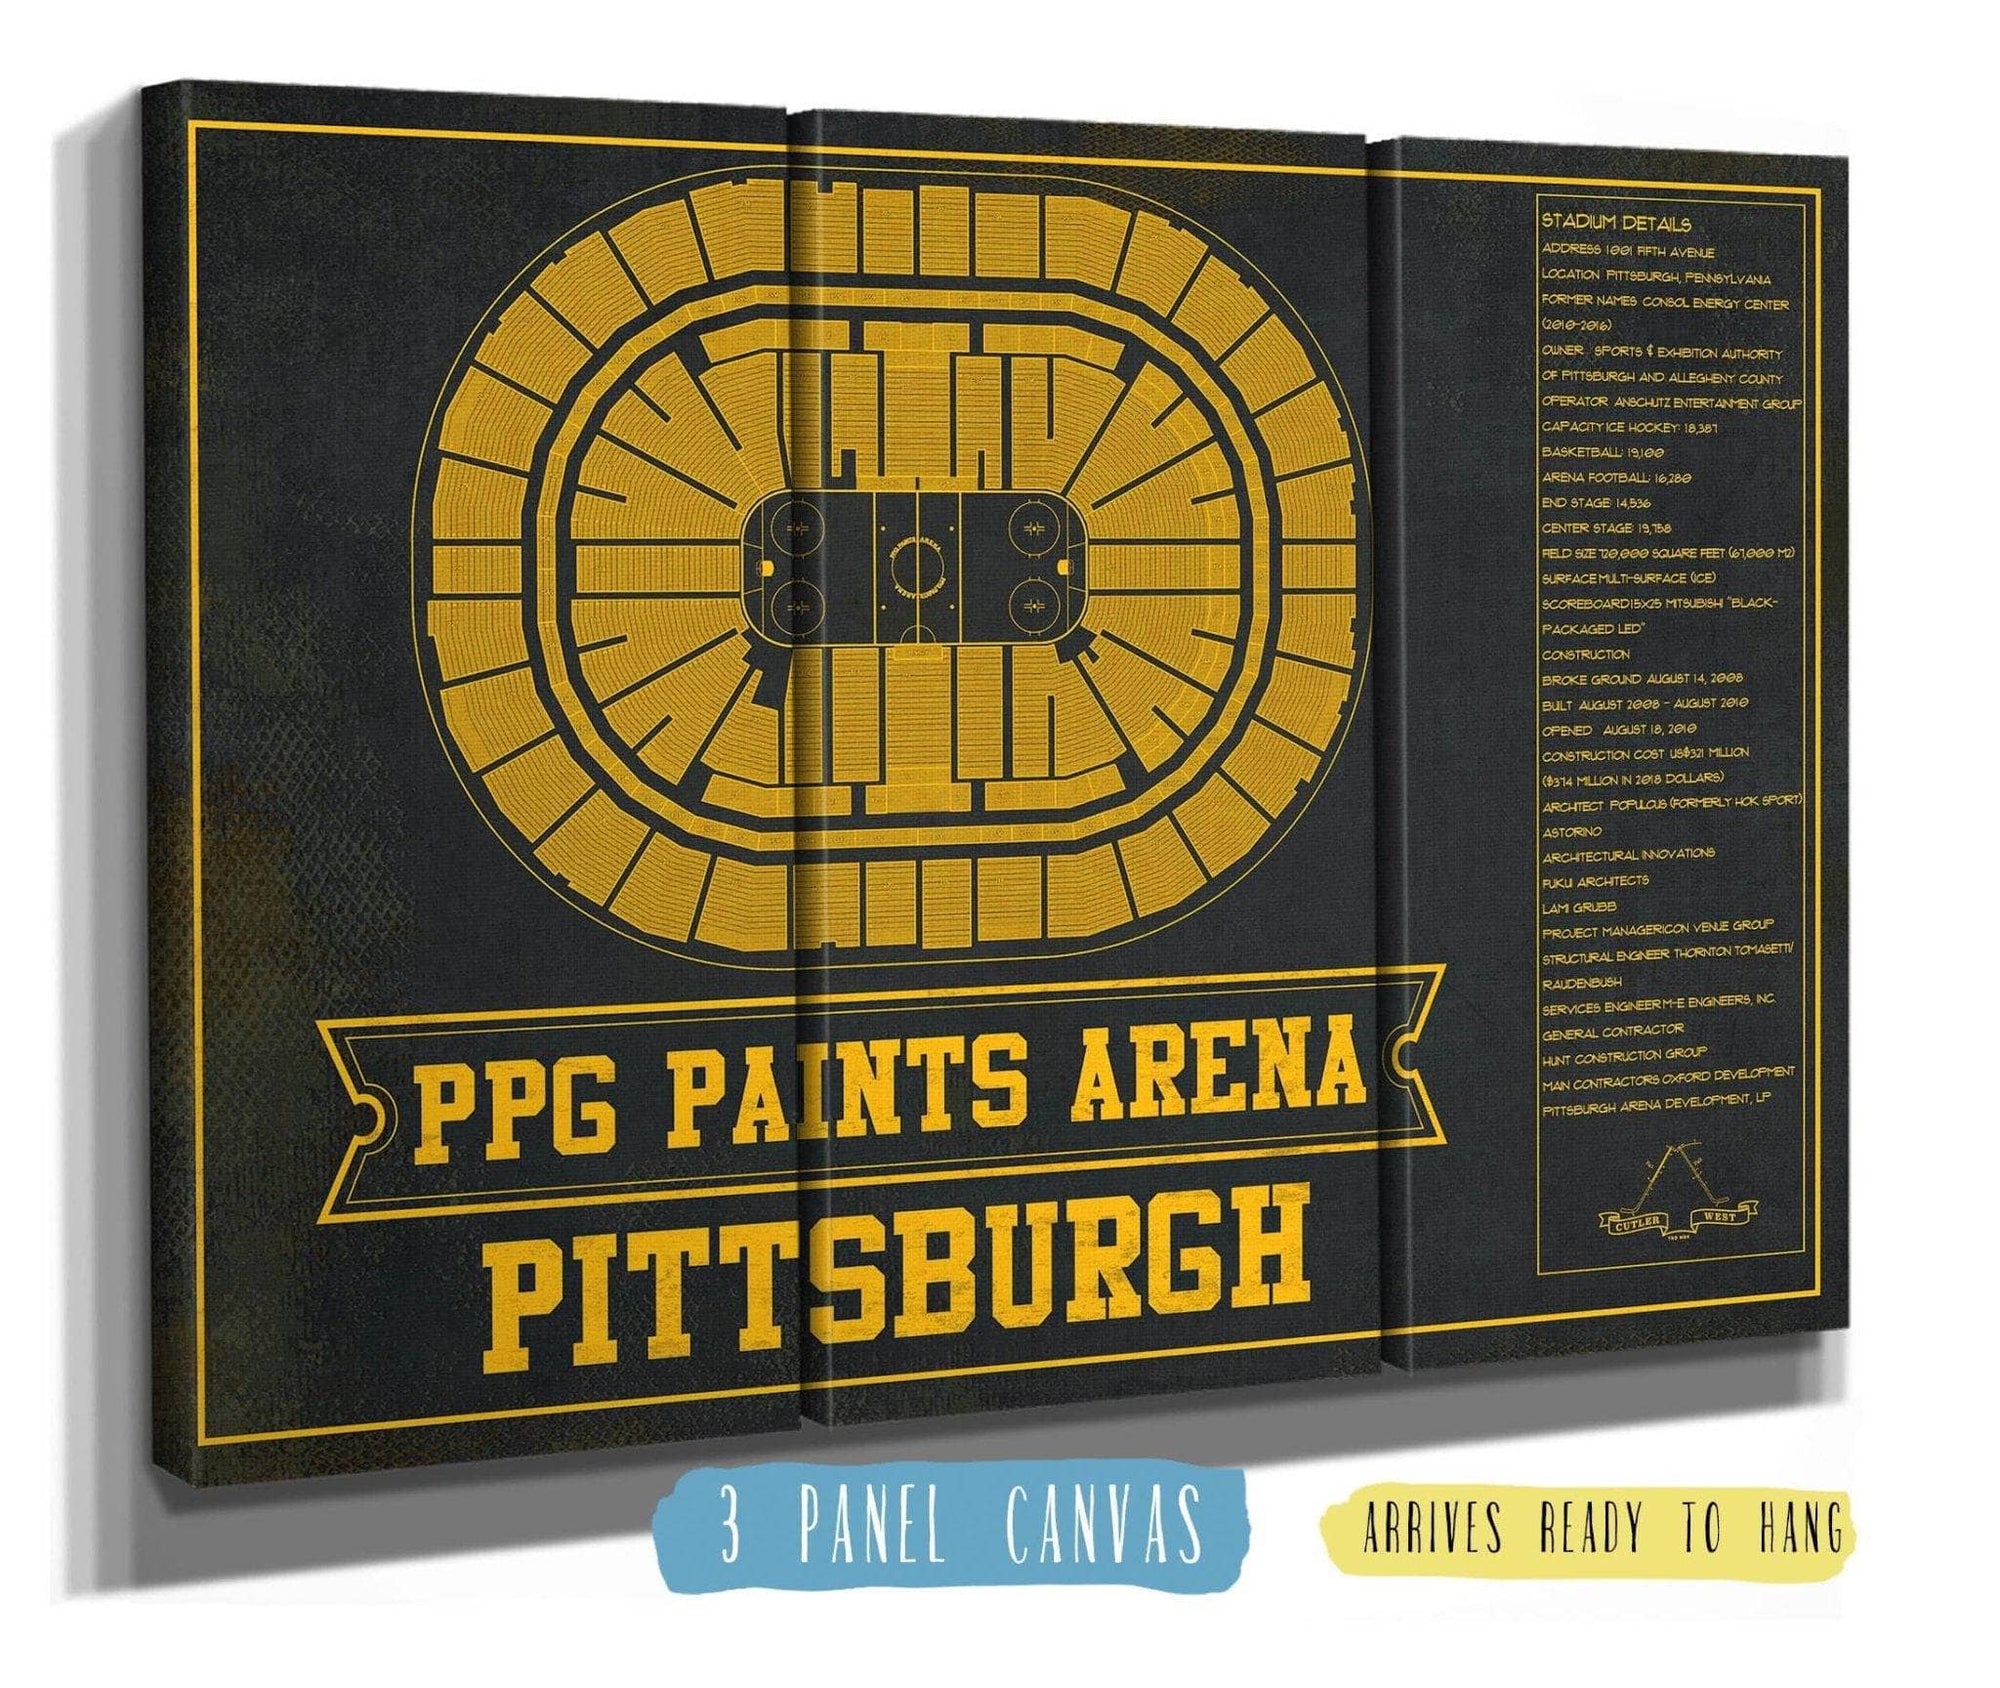 Cutler West 48" x 32" / 3 Panel Canvas Wrap Pittsburgh Penguins PPG Paints Arena Seating Chart - Vintage Hockey Team Color Print 659983736-TEAM